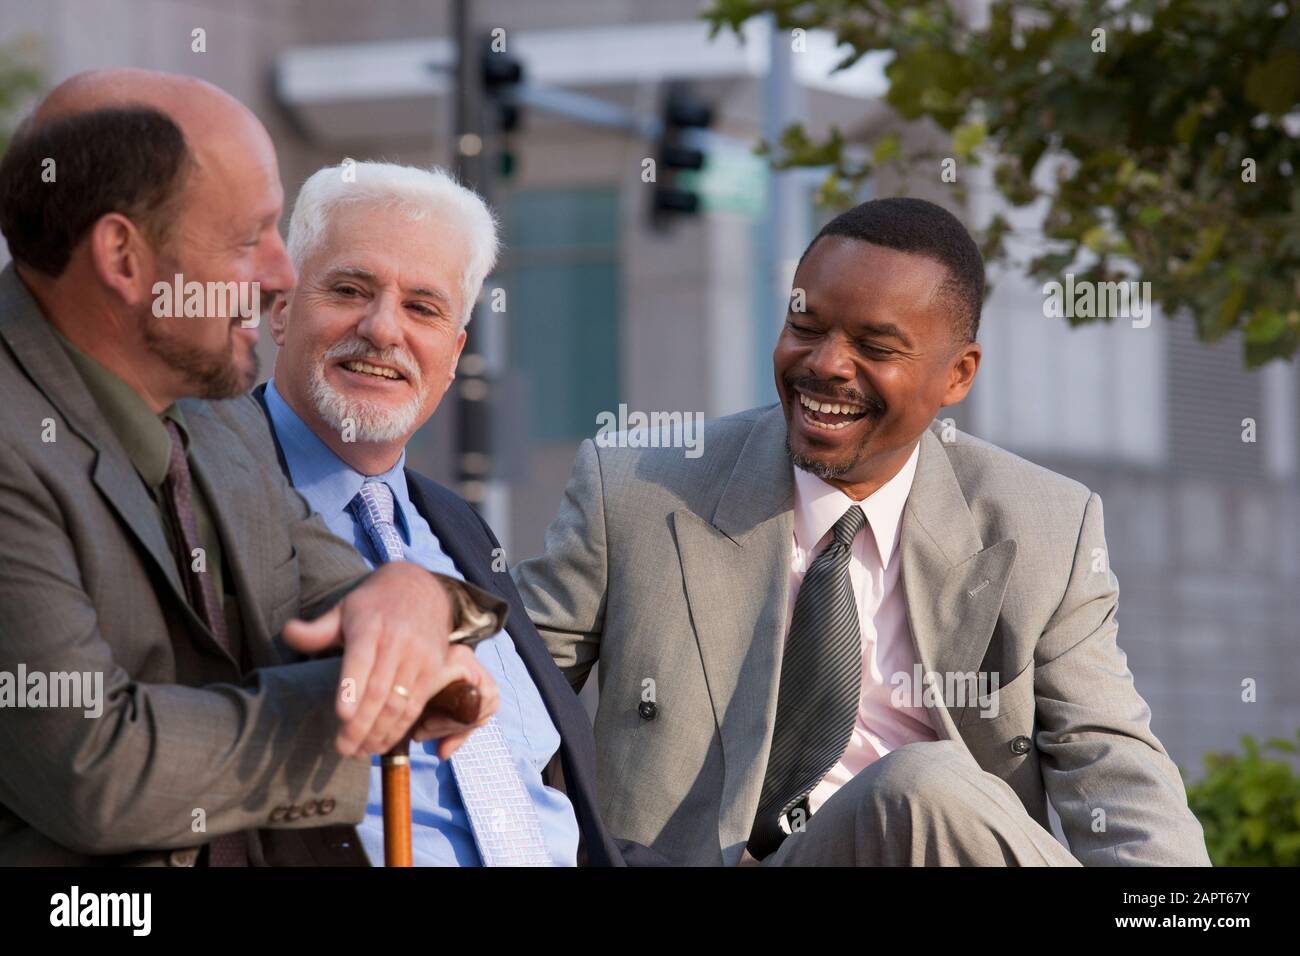 Businessmen talking and sharing insights, with one businessman holding a cane Stock Photo